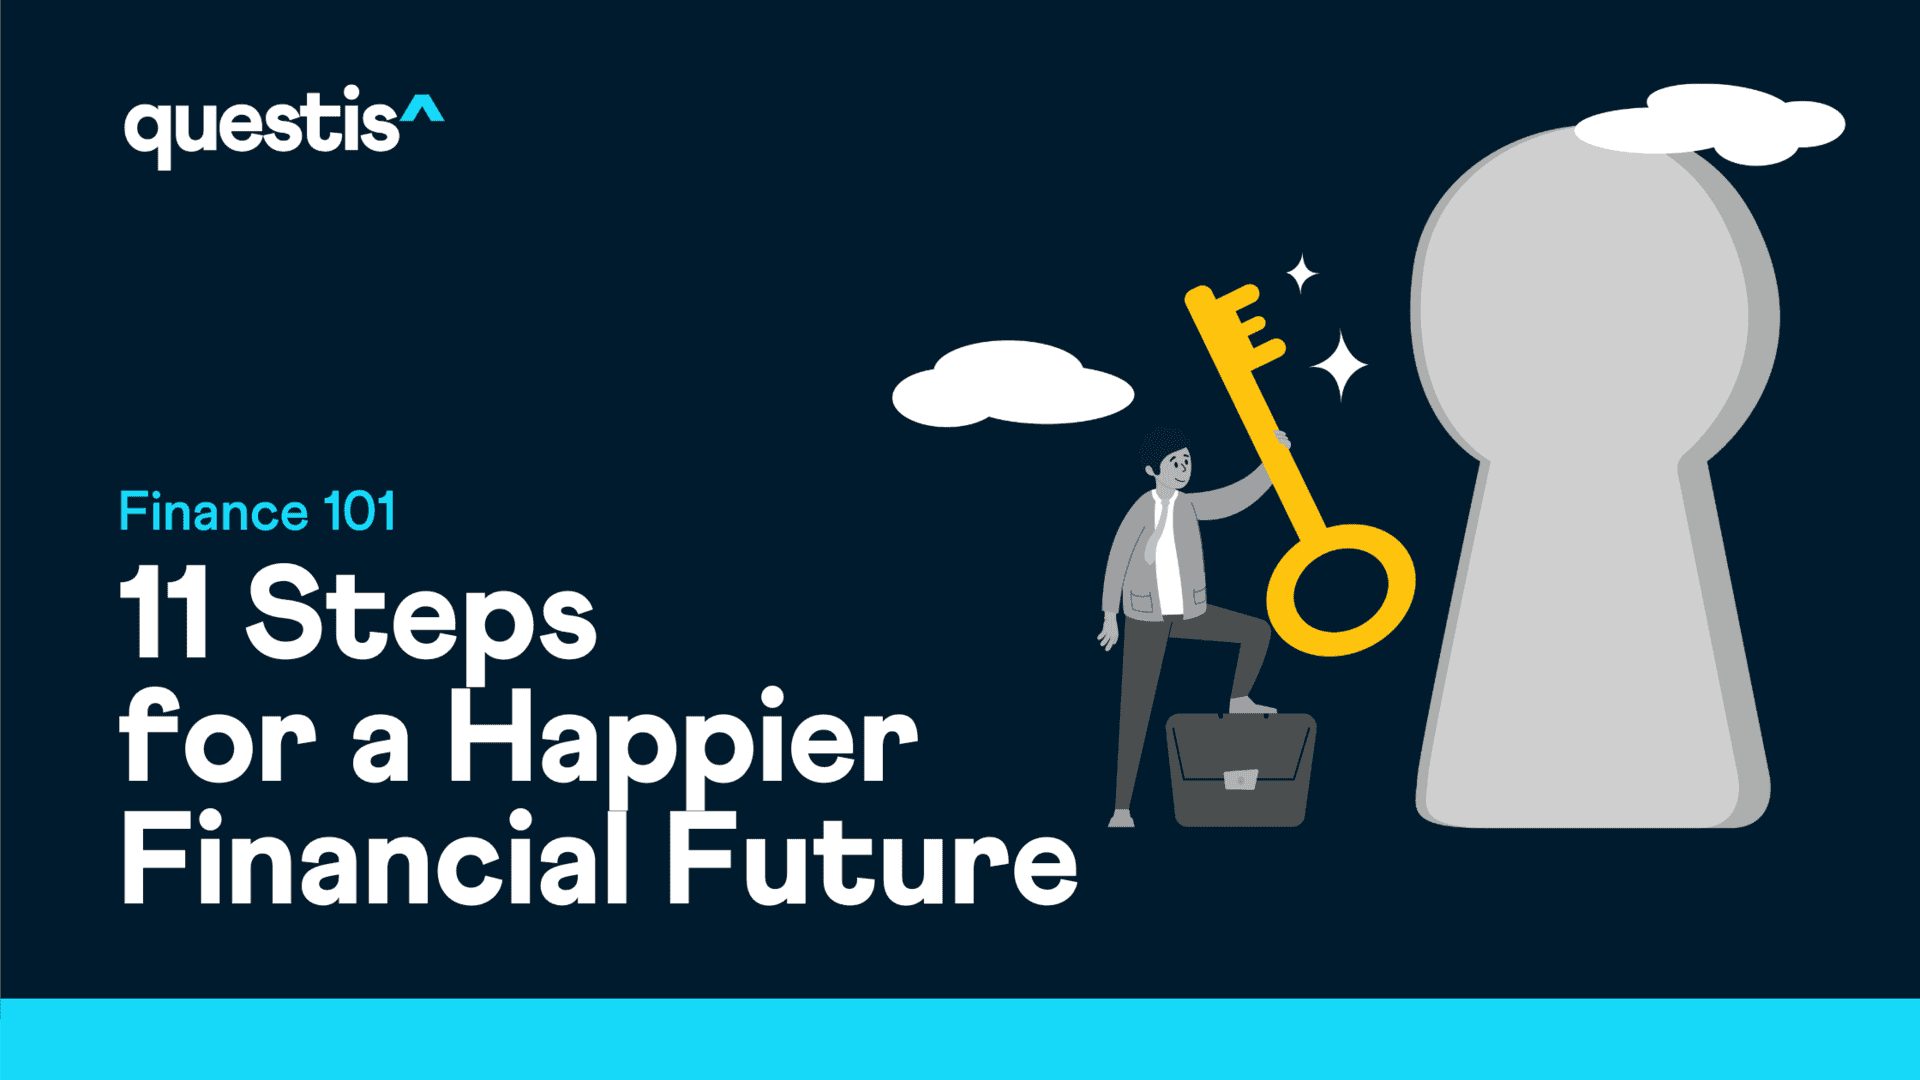 11 Steps For a Happier Financial Future